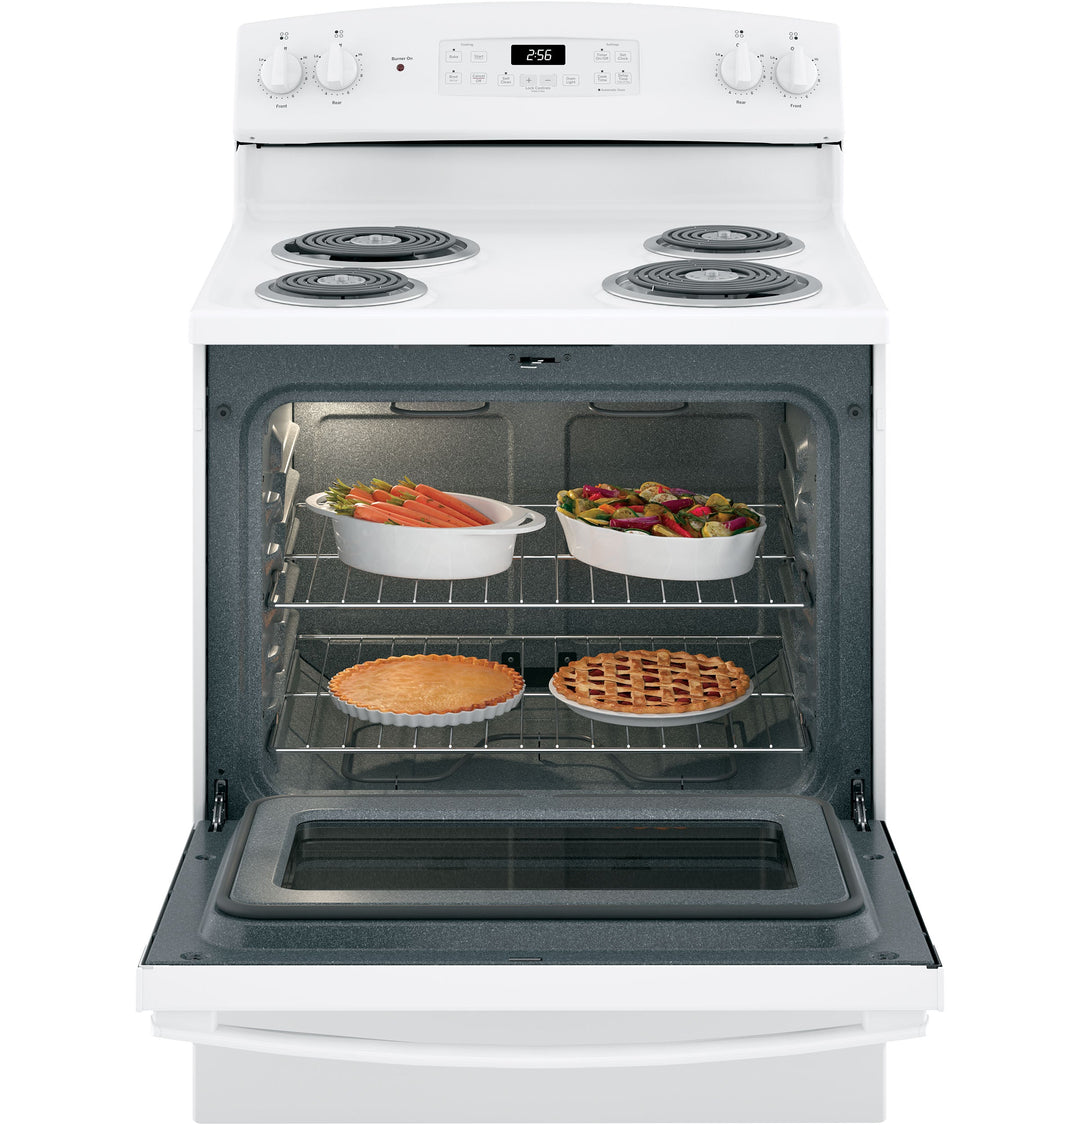 GE® 30" Free-Standing Self-Clean Electric Range Auction